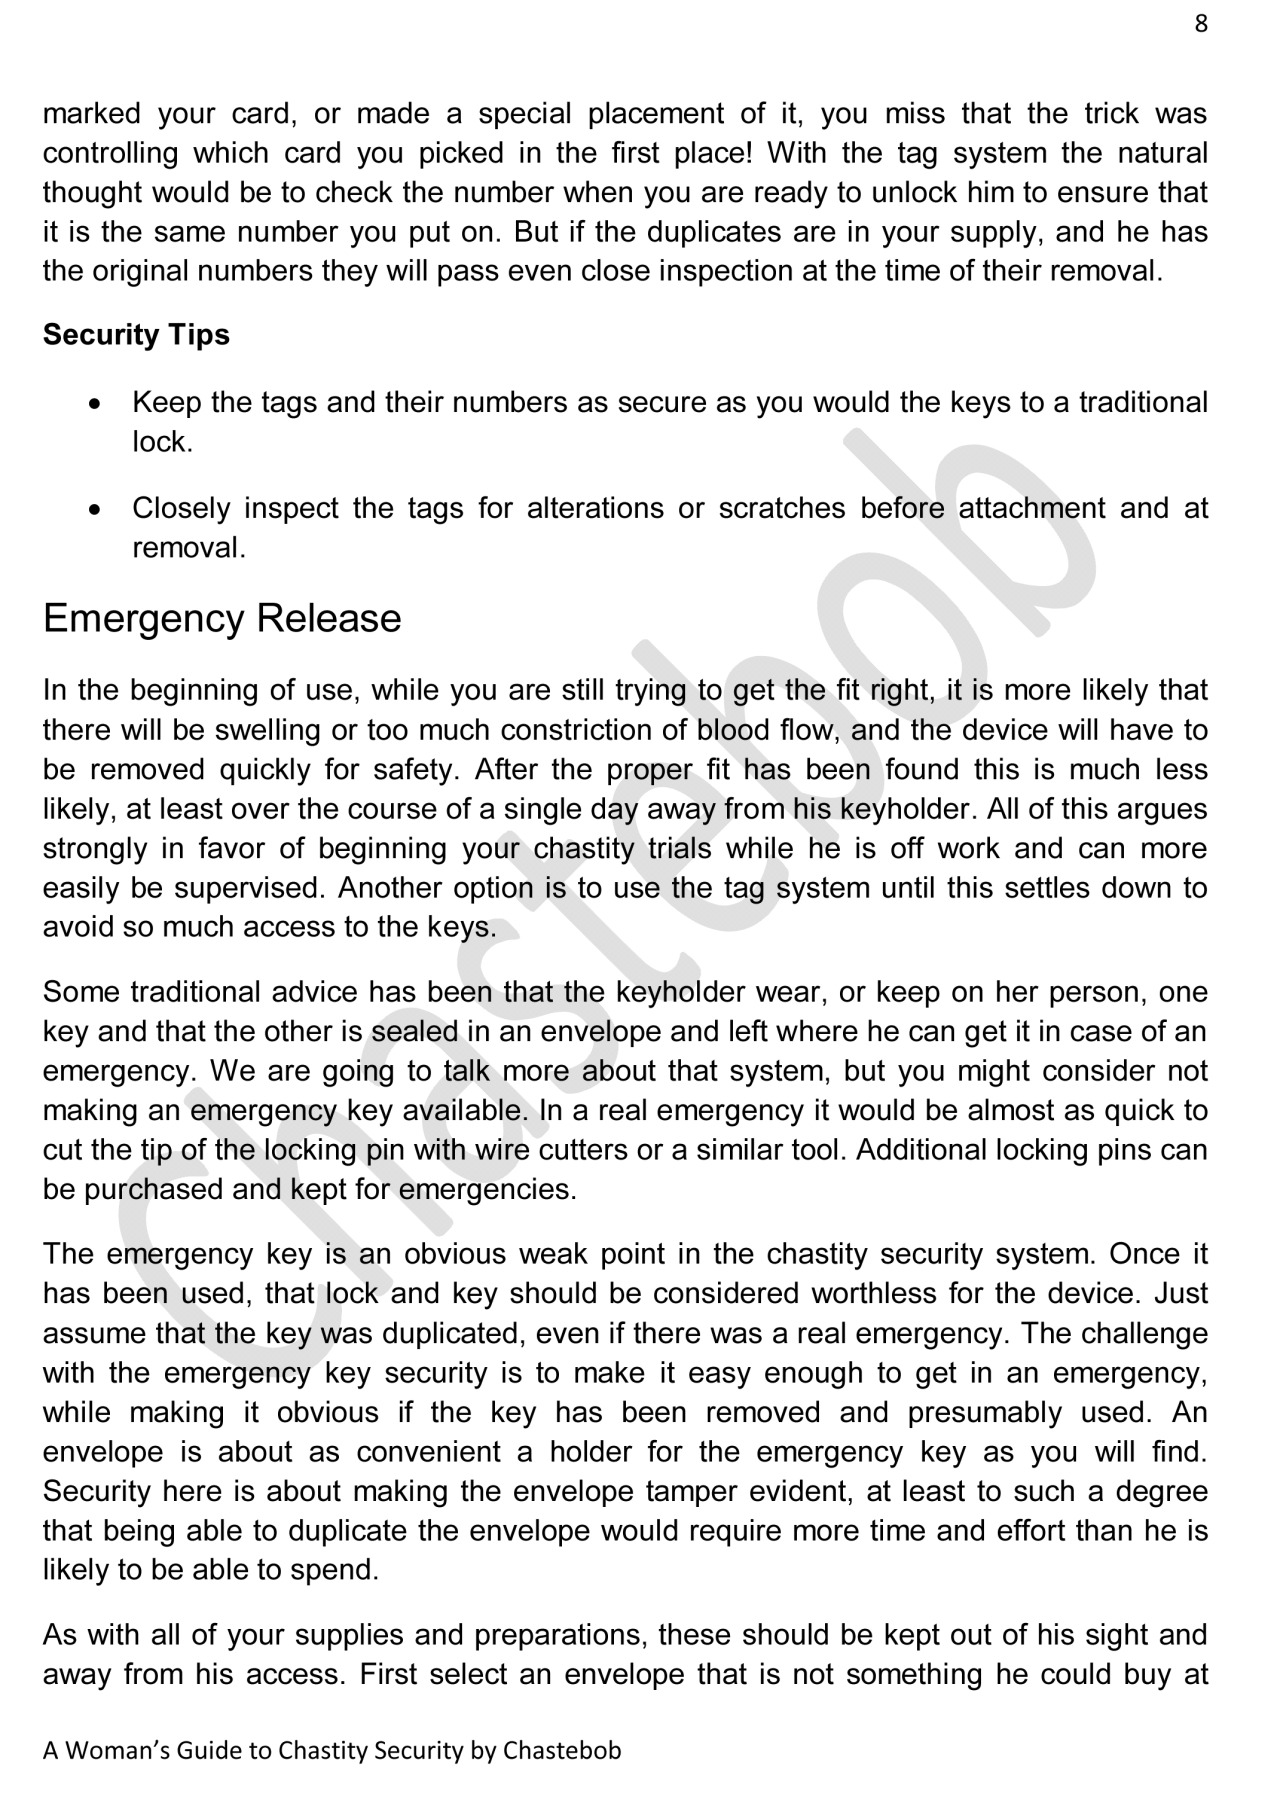 Expanded guide to chastity security.